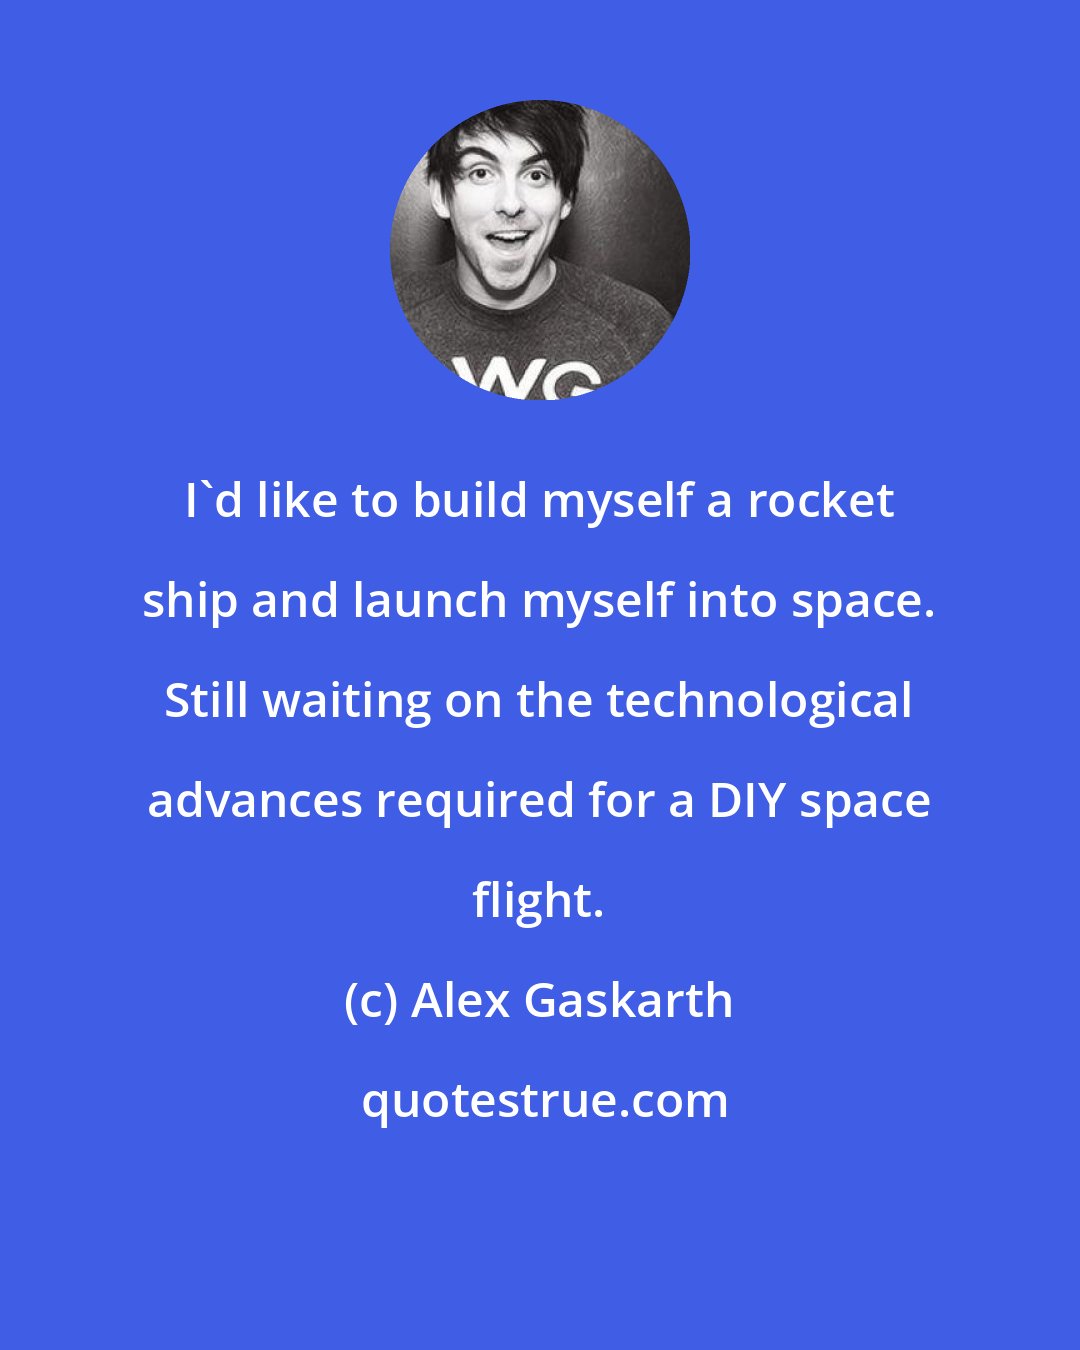 Alex Gaskarth: I'd like to build myself a rocket ship and launch myself into space. Still waiting on the technological advances required for a DIY space flight.